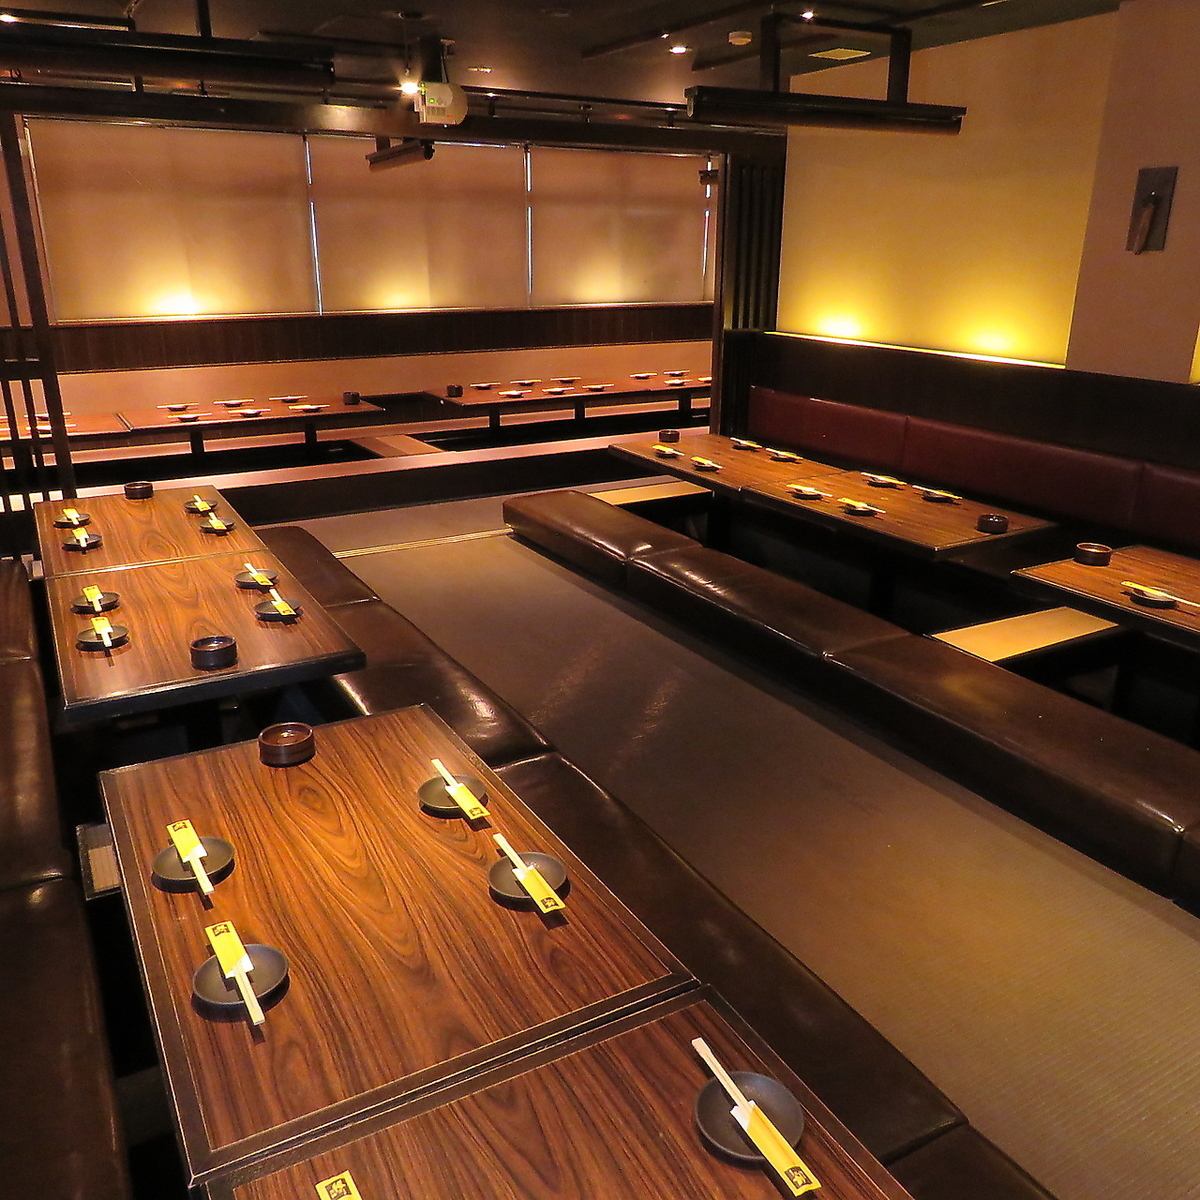 ★For courses over 3,000 yen and for 6 or more people, one organizer is completely free!